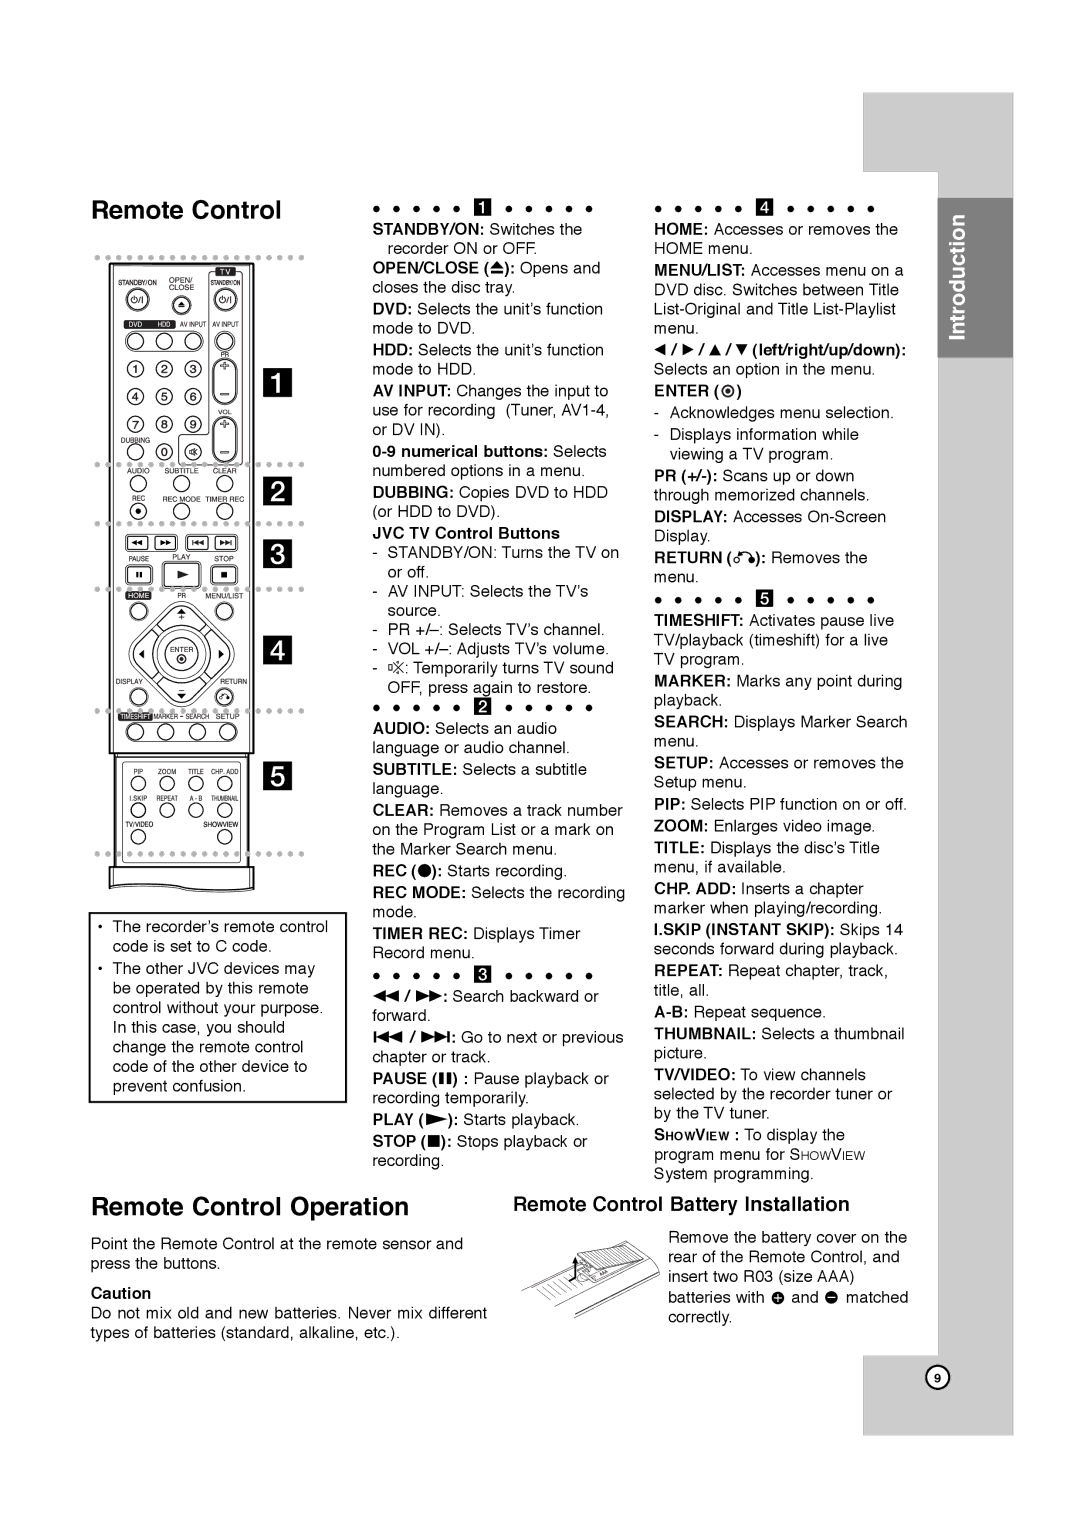 JVC LPT1132-001A manual Remote Control Operation, Remote Control Battery Installation 